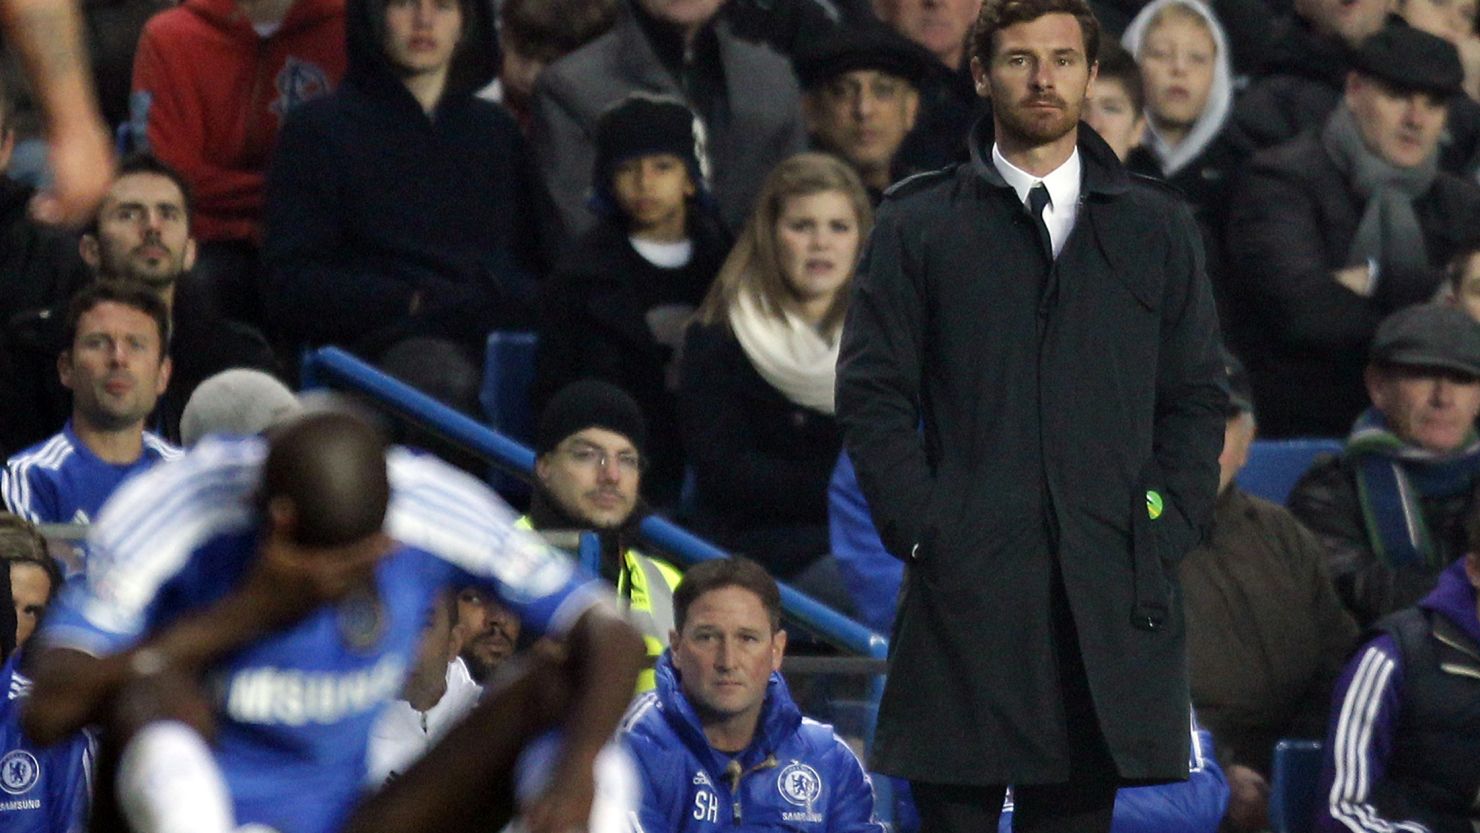 Andre Villas Boas has cut a lonely figure on the Chelsea touchline this season as his side have struggled for form.